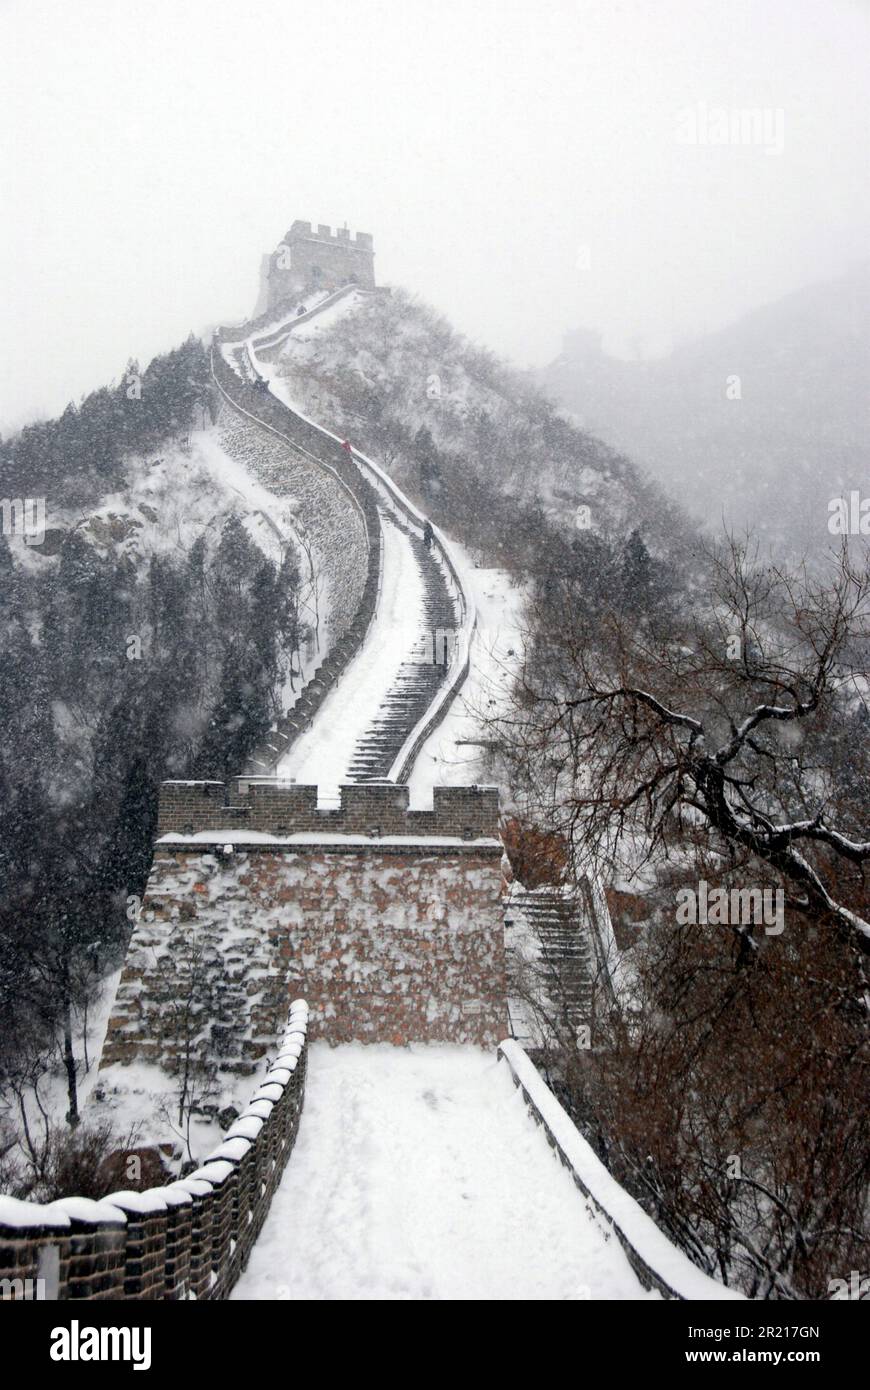 Beijing, China - Heavy snow hits Beijing and surrounding areas causing widespread disruption to rail, road and air travel. Temperatures fell as low as -17 degrees Celsius. Picturesque scene of the Great Wall of China at Juyongguan around 50 km north-west of Beijing Stock Photo